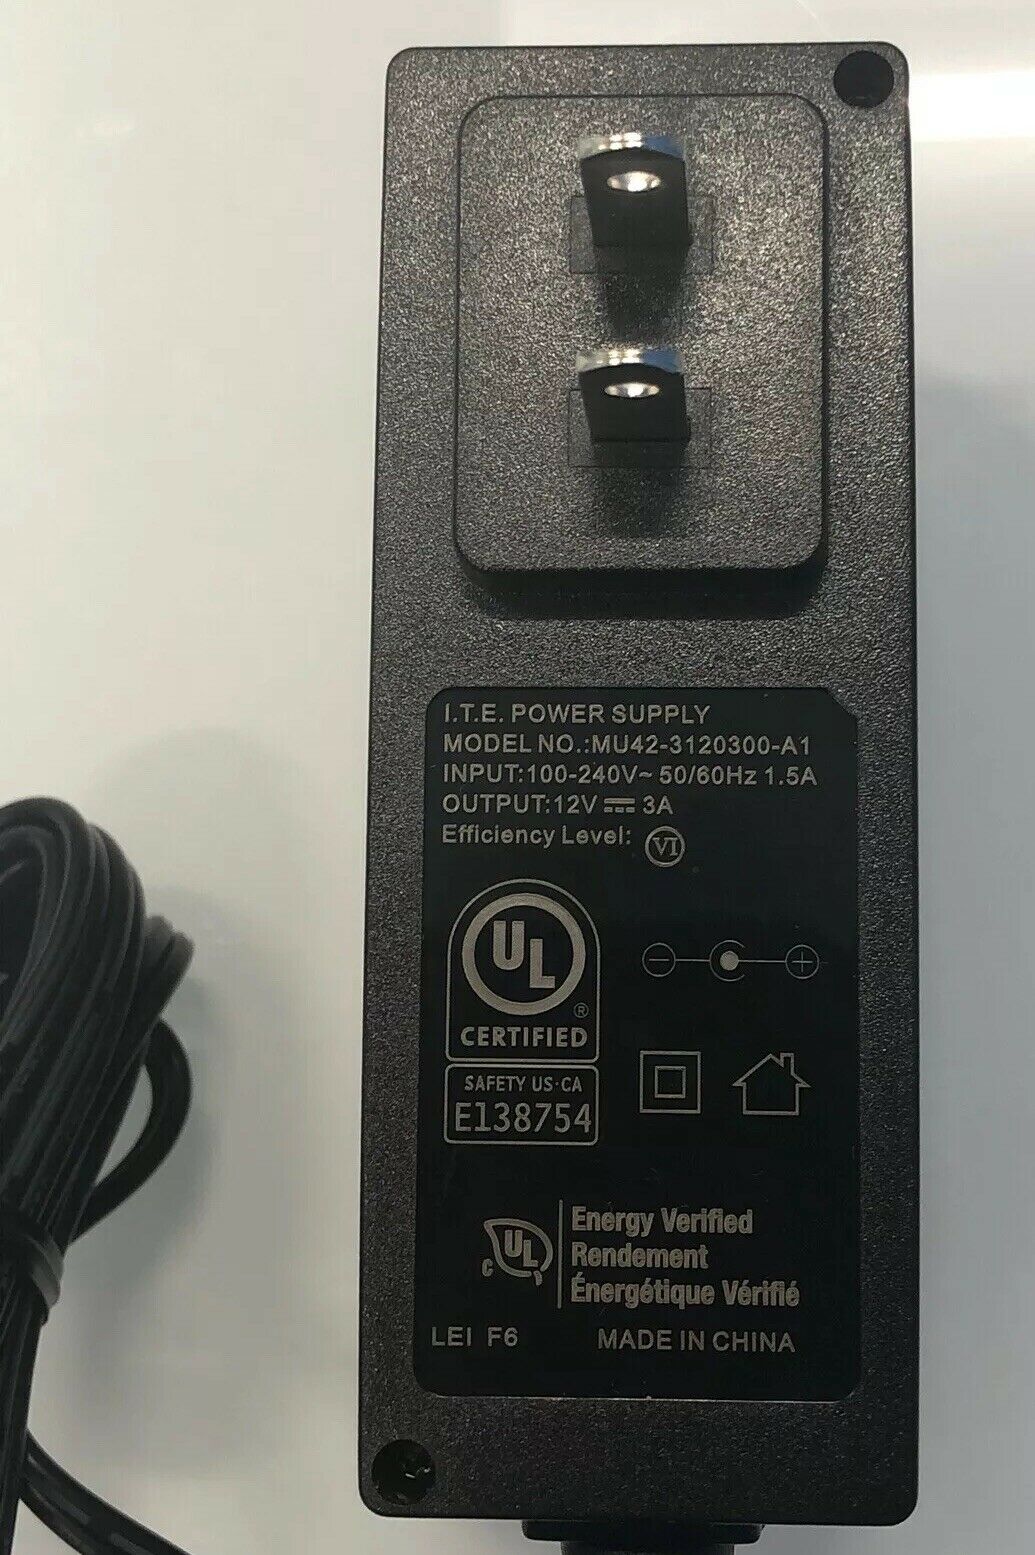 Switchable I.T.E. Power supply Model # MU42-3120300-A1 12V 3A **NEW** Brand: I.T.E. Type: AC/DC Adapter Connection